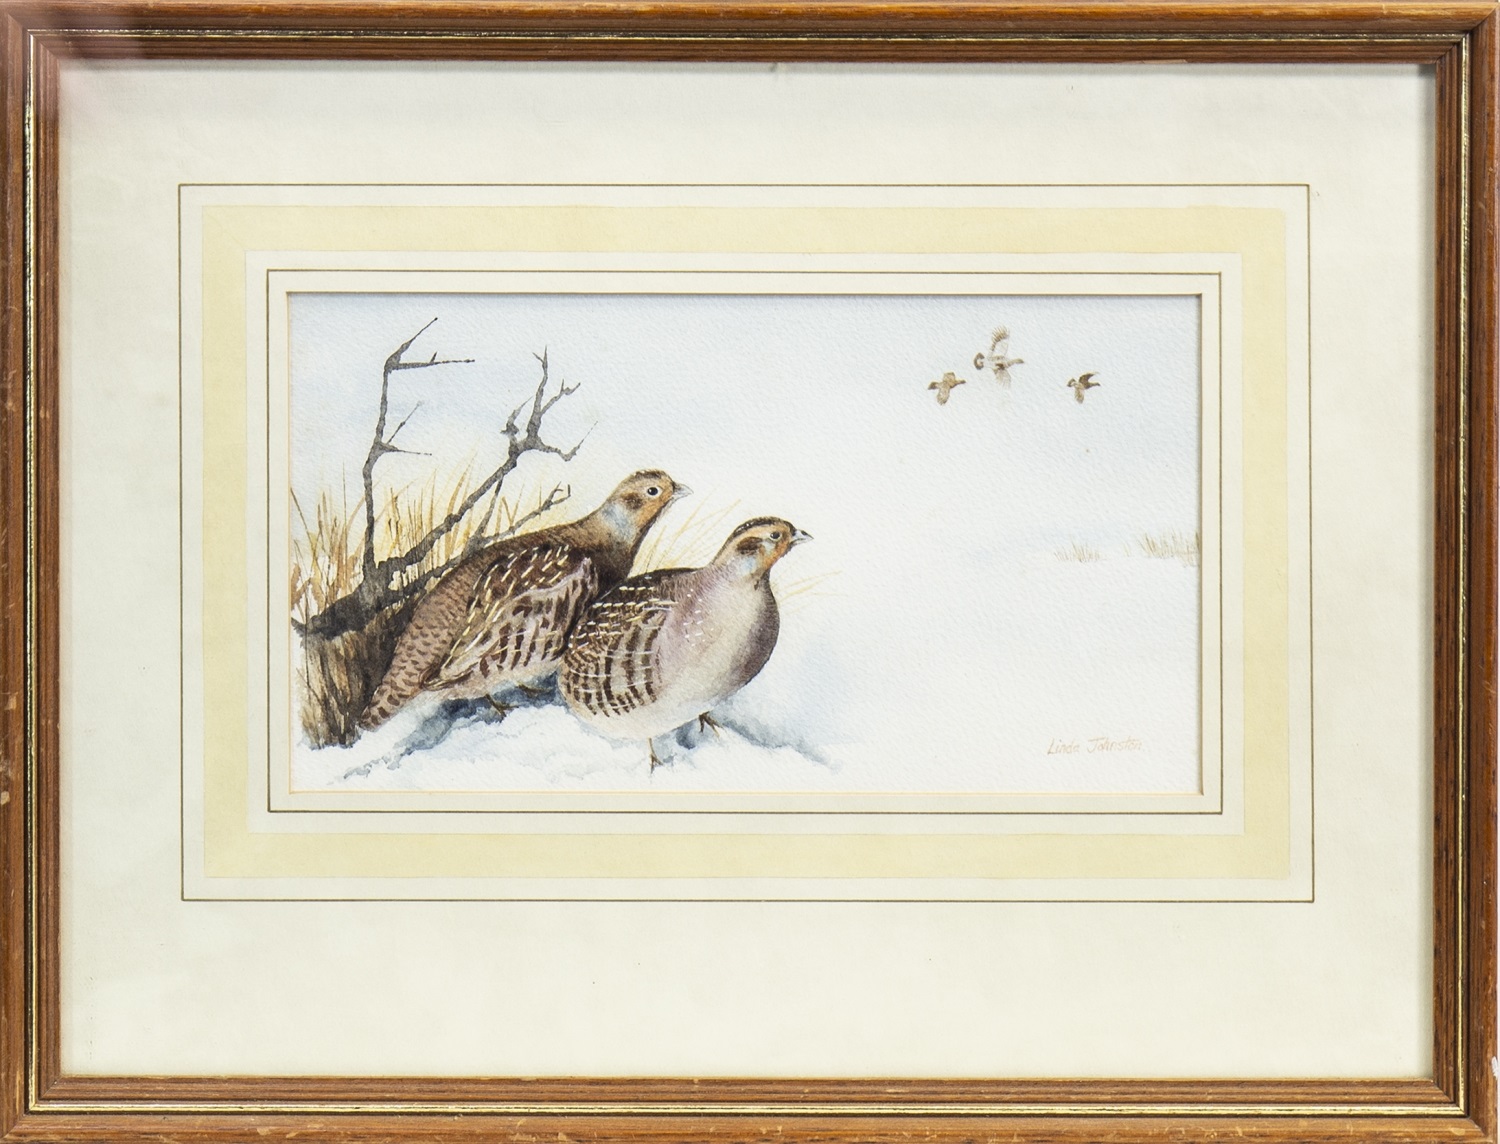 GROUSE IN THE SNOW, A WATERCOLOUR BY LINDA JOHNSTON - Image 2 of 2